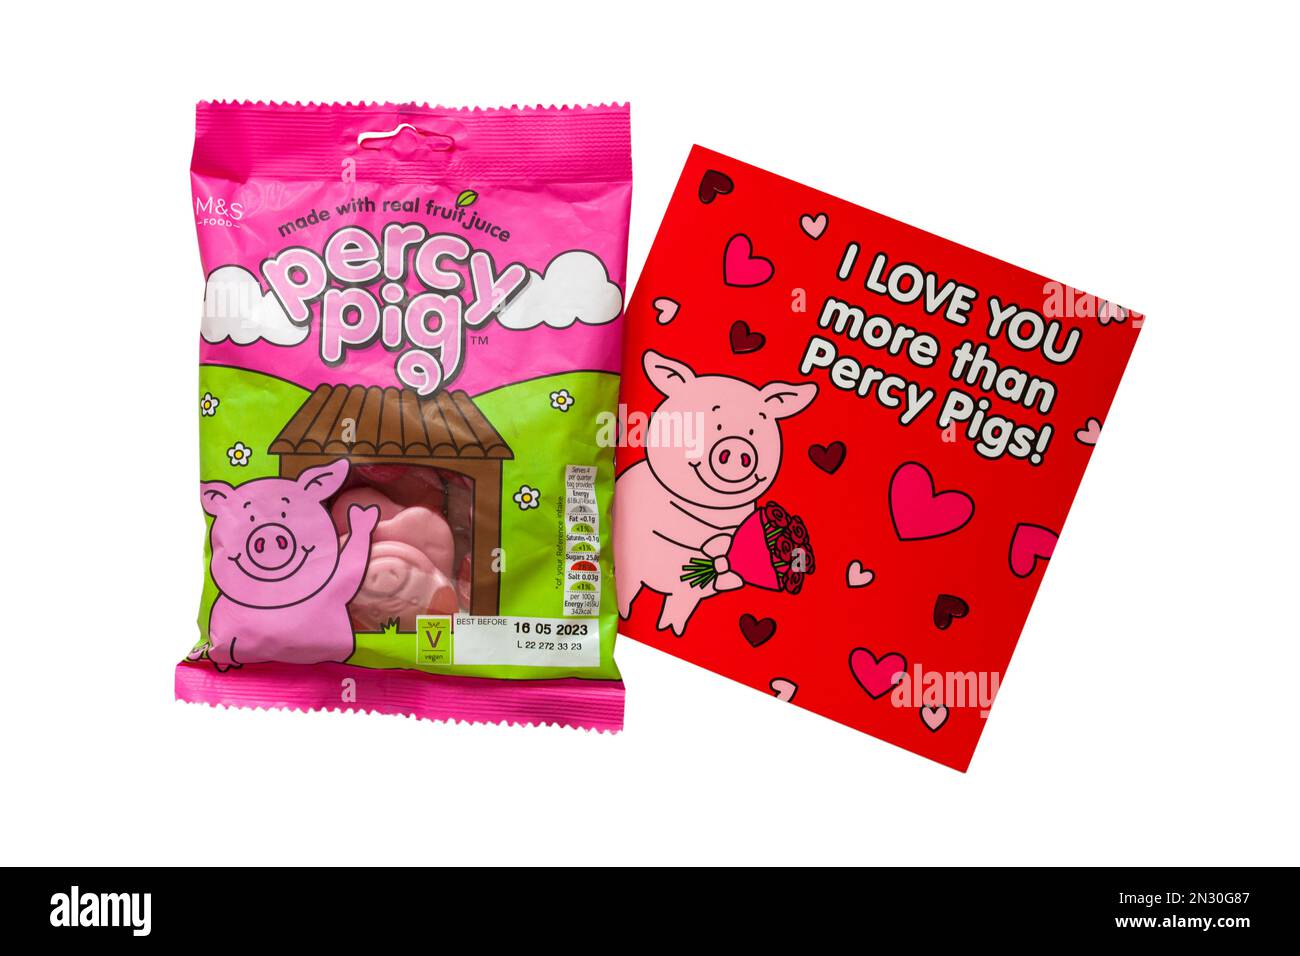 I love you more than Percy Pigs valentine card with packet of Percy Pig Sweets Stock Photo